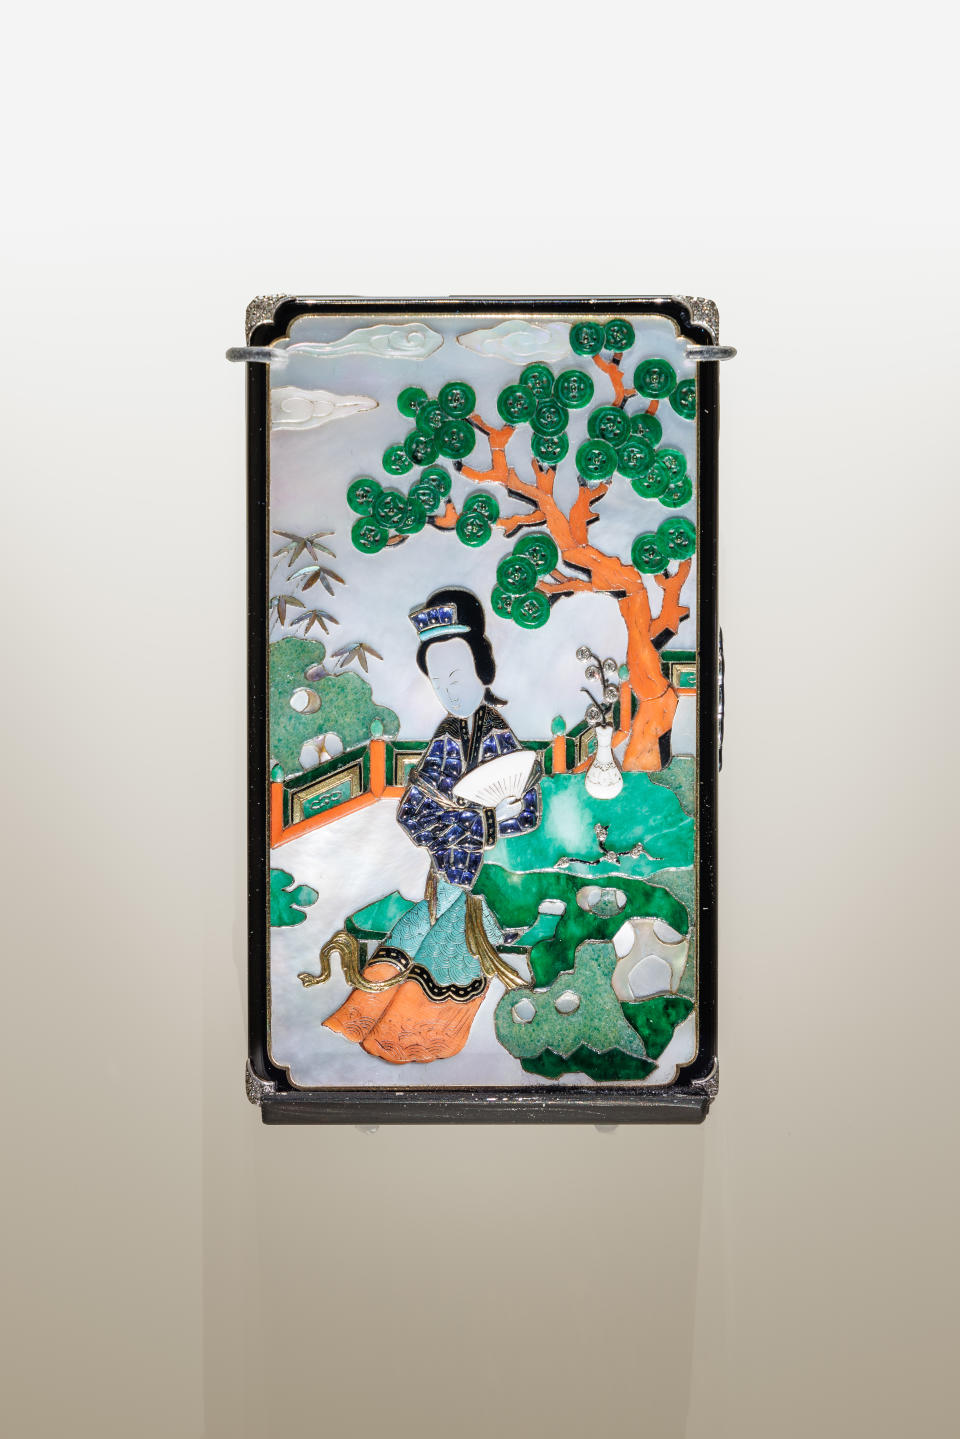 A 1928 Chinese-style vanity case that references a Kangxi period porcelain dish from the collection of Mr. and Mrs. Louis Cartier.